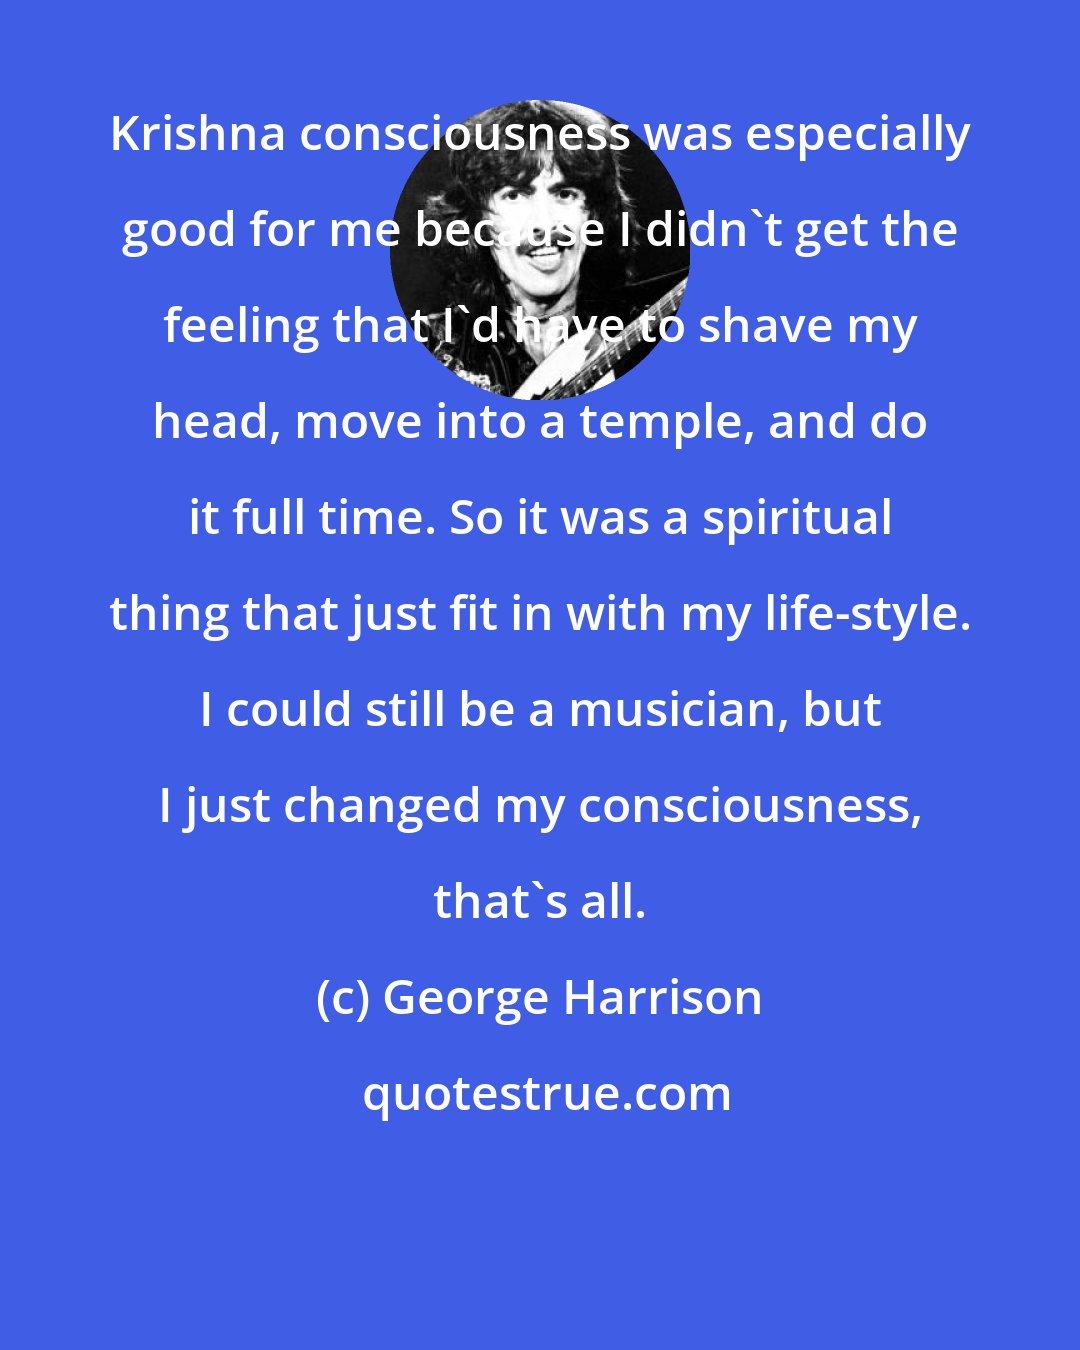 George Harrison: Krishna consciousness was especially good for me because I didn't get the feeling that I'd have to shave my head, move into a temple, and do it full time. So it was a spiritual thing that just fit in with my life-style. I could still be a musician, but I just changed my consciousness, that's all.